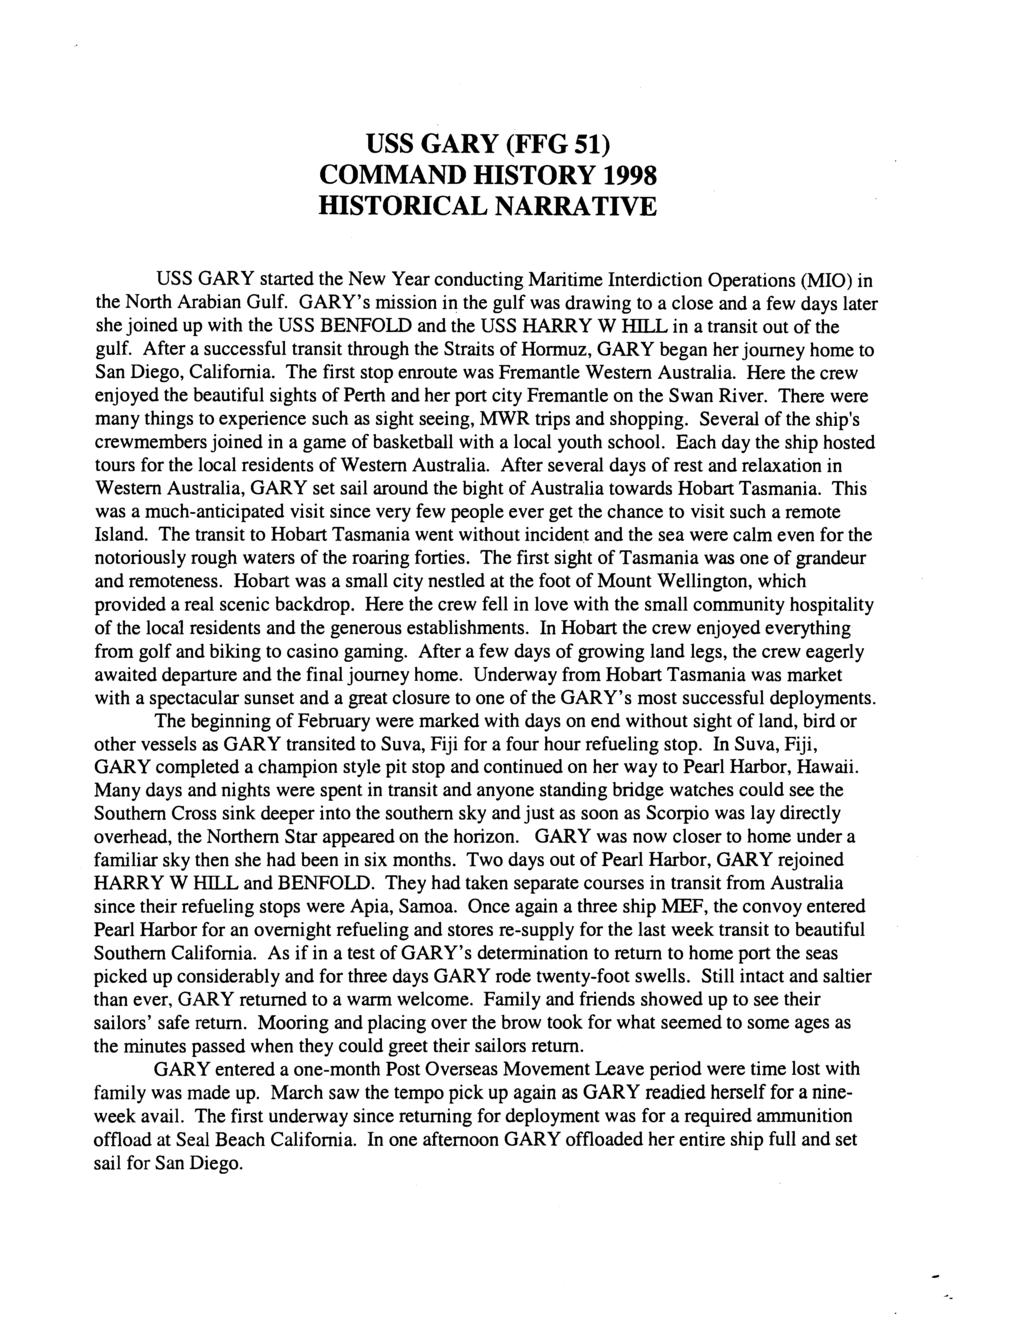 USS GARY (FFG 51) COMMAND HISTORY 1998 HISTORICAL NARRATIVE USS GARY started the New Year conducting Maritime Interdiction Operations (MIO) in the North Arabian Gulf.